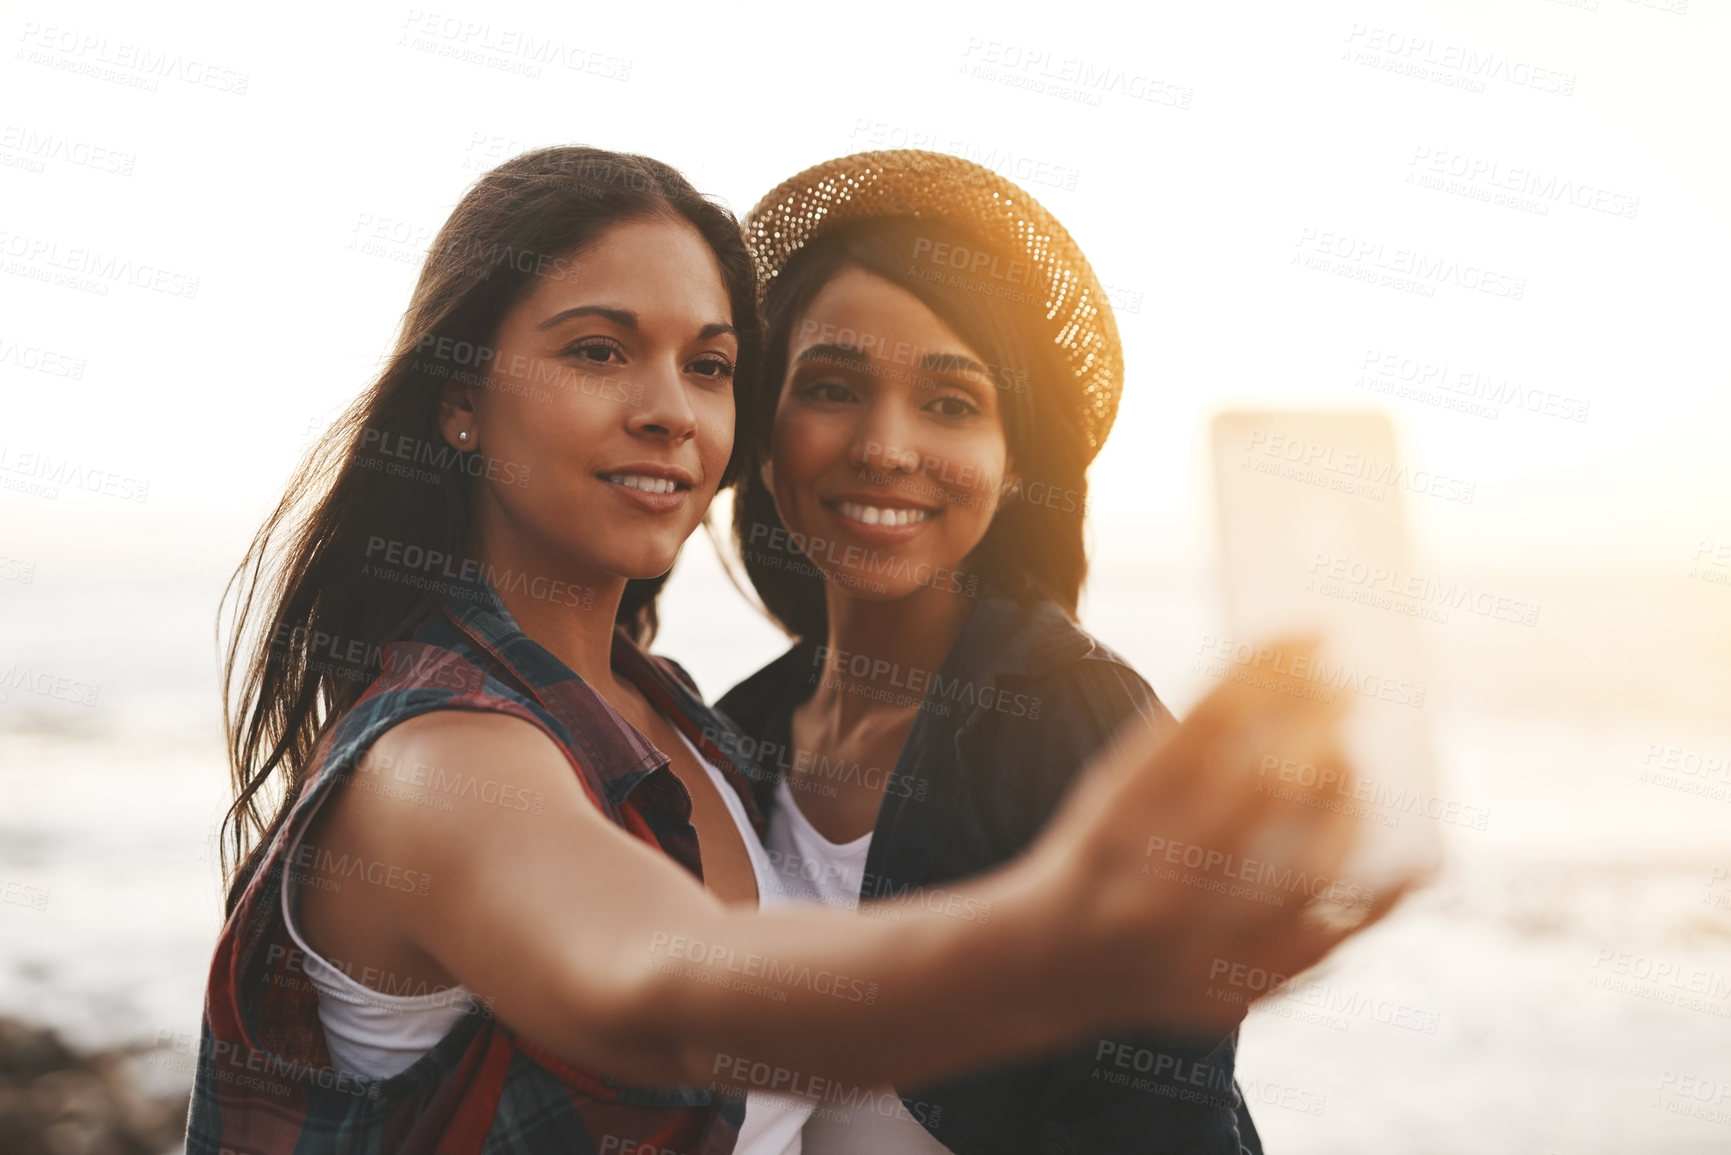 Buy stock photo Shot of two young friends taking a selfie together at the beach